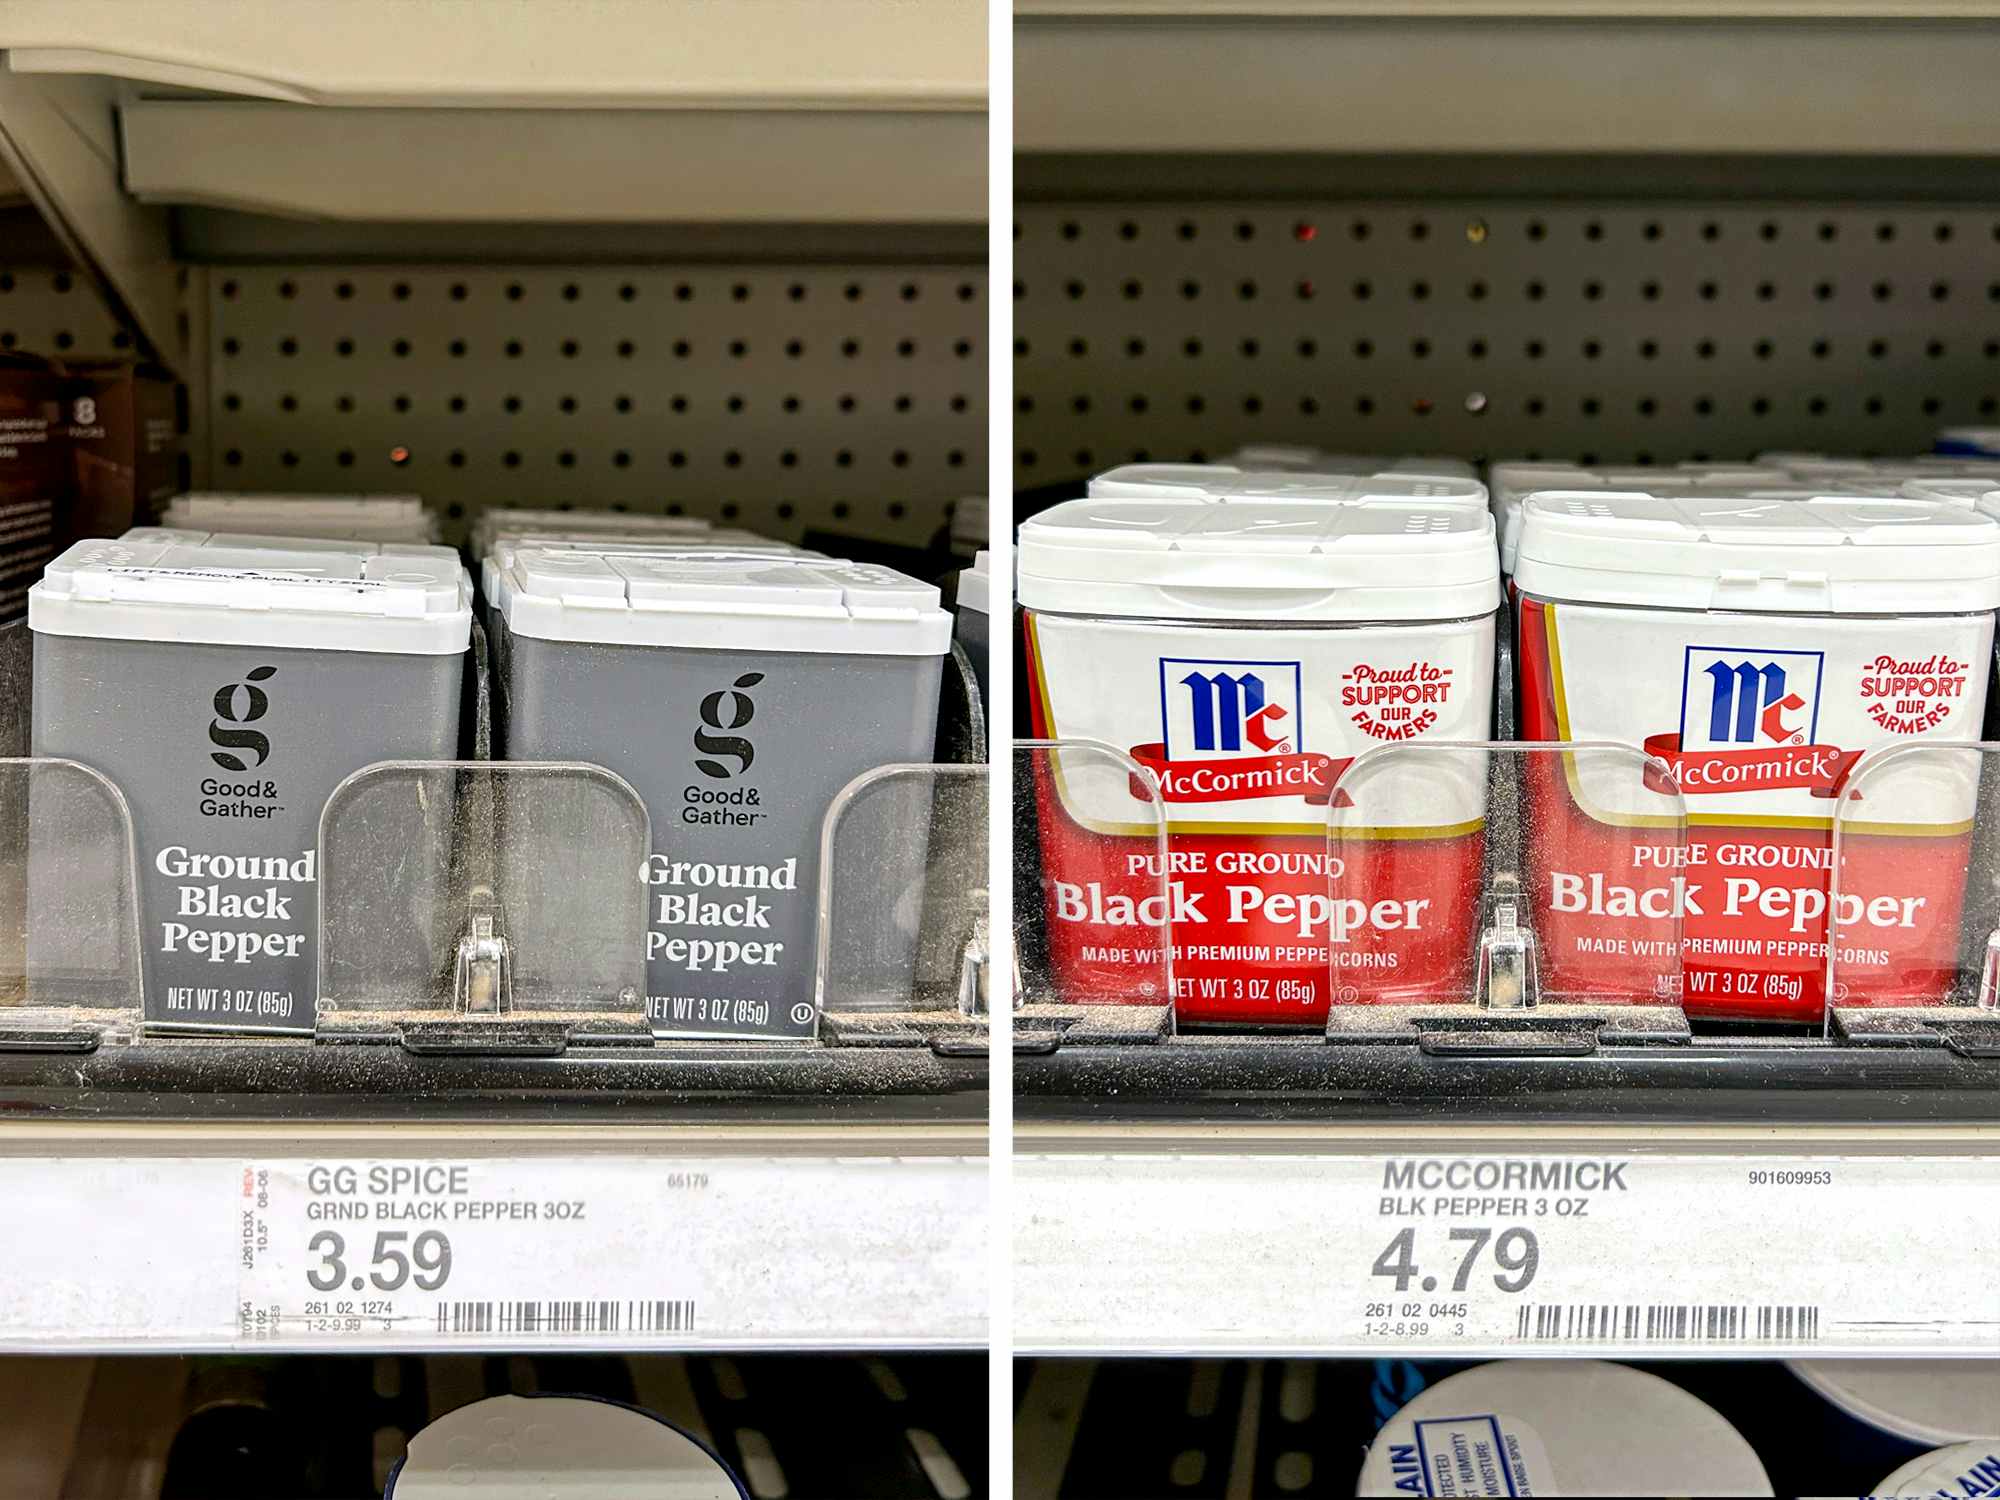 target's good and gather vs mccormick brand spices price comparison